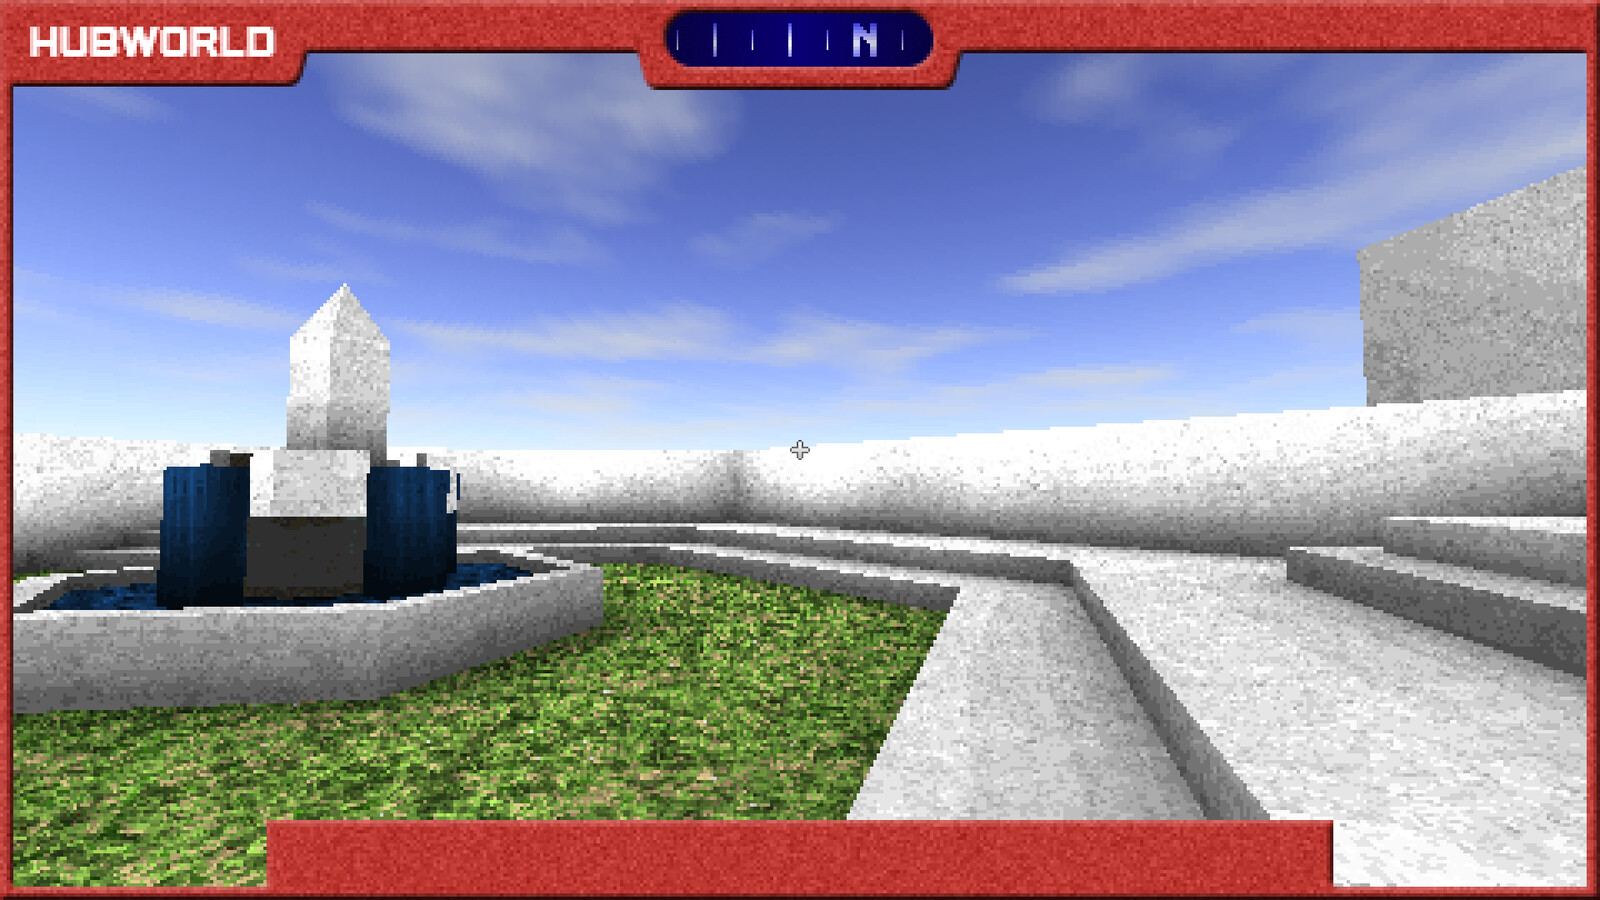 Another screenshot of the hub world, showing an early HUD design.